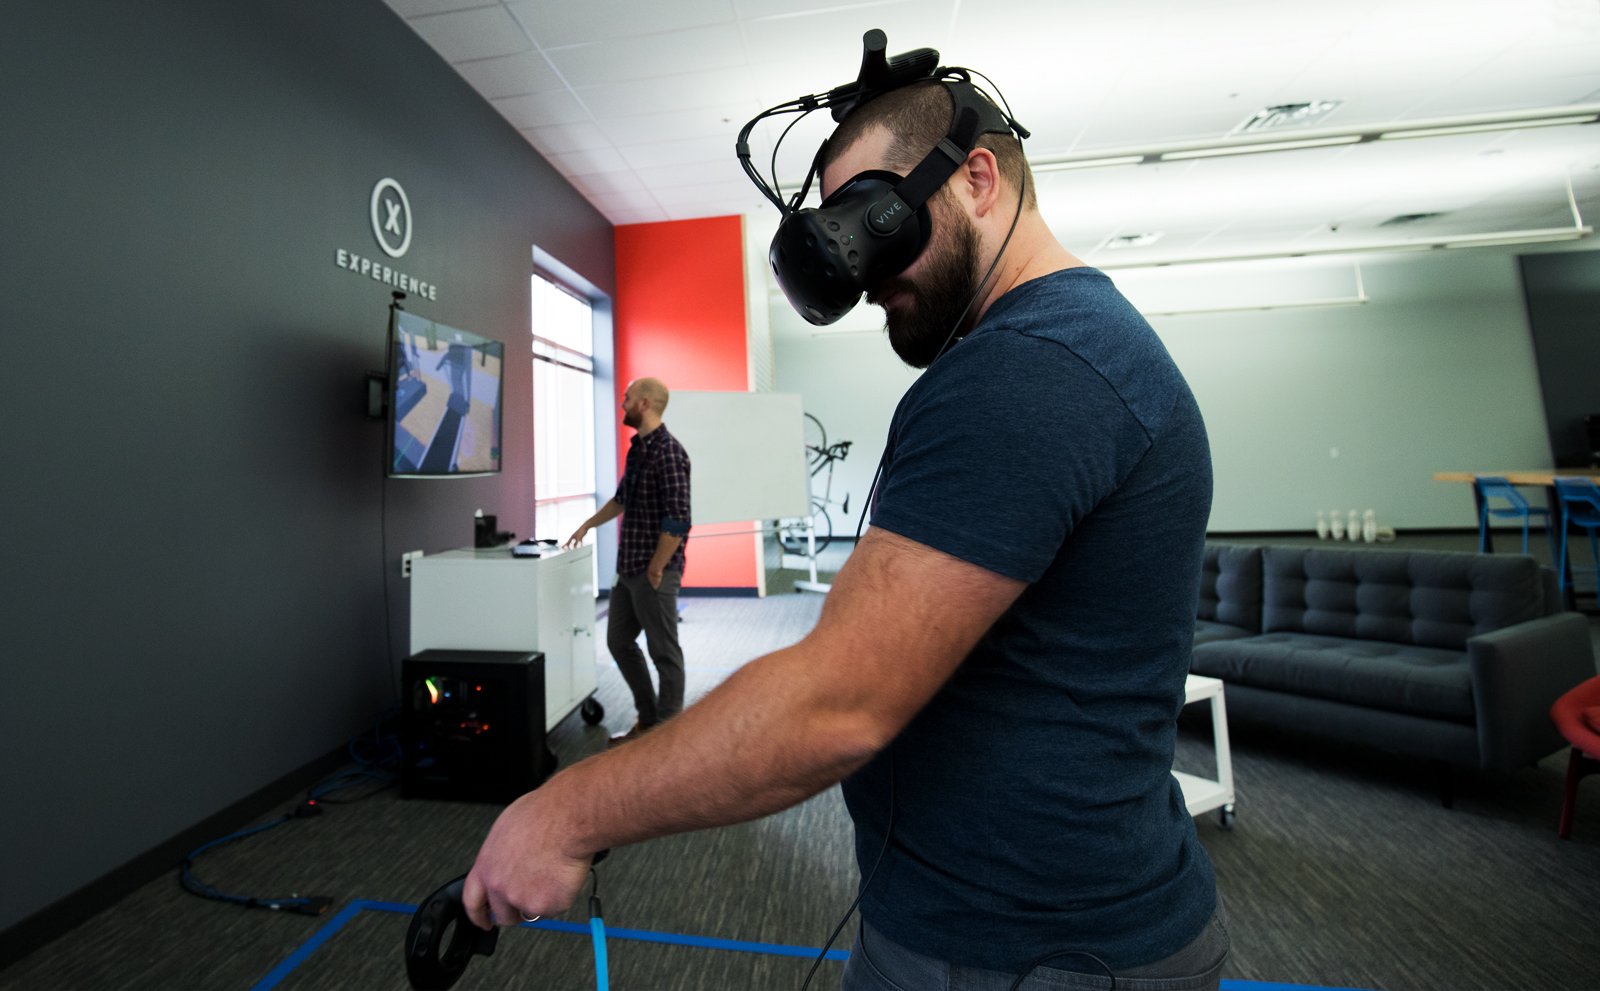 At The Bernard Group, we use technologies like virtual reality to help our customers experience designed spaces before production begins.